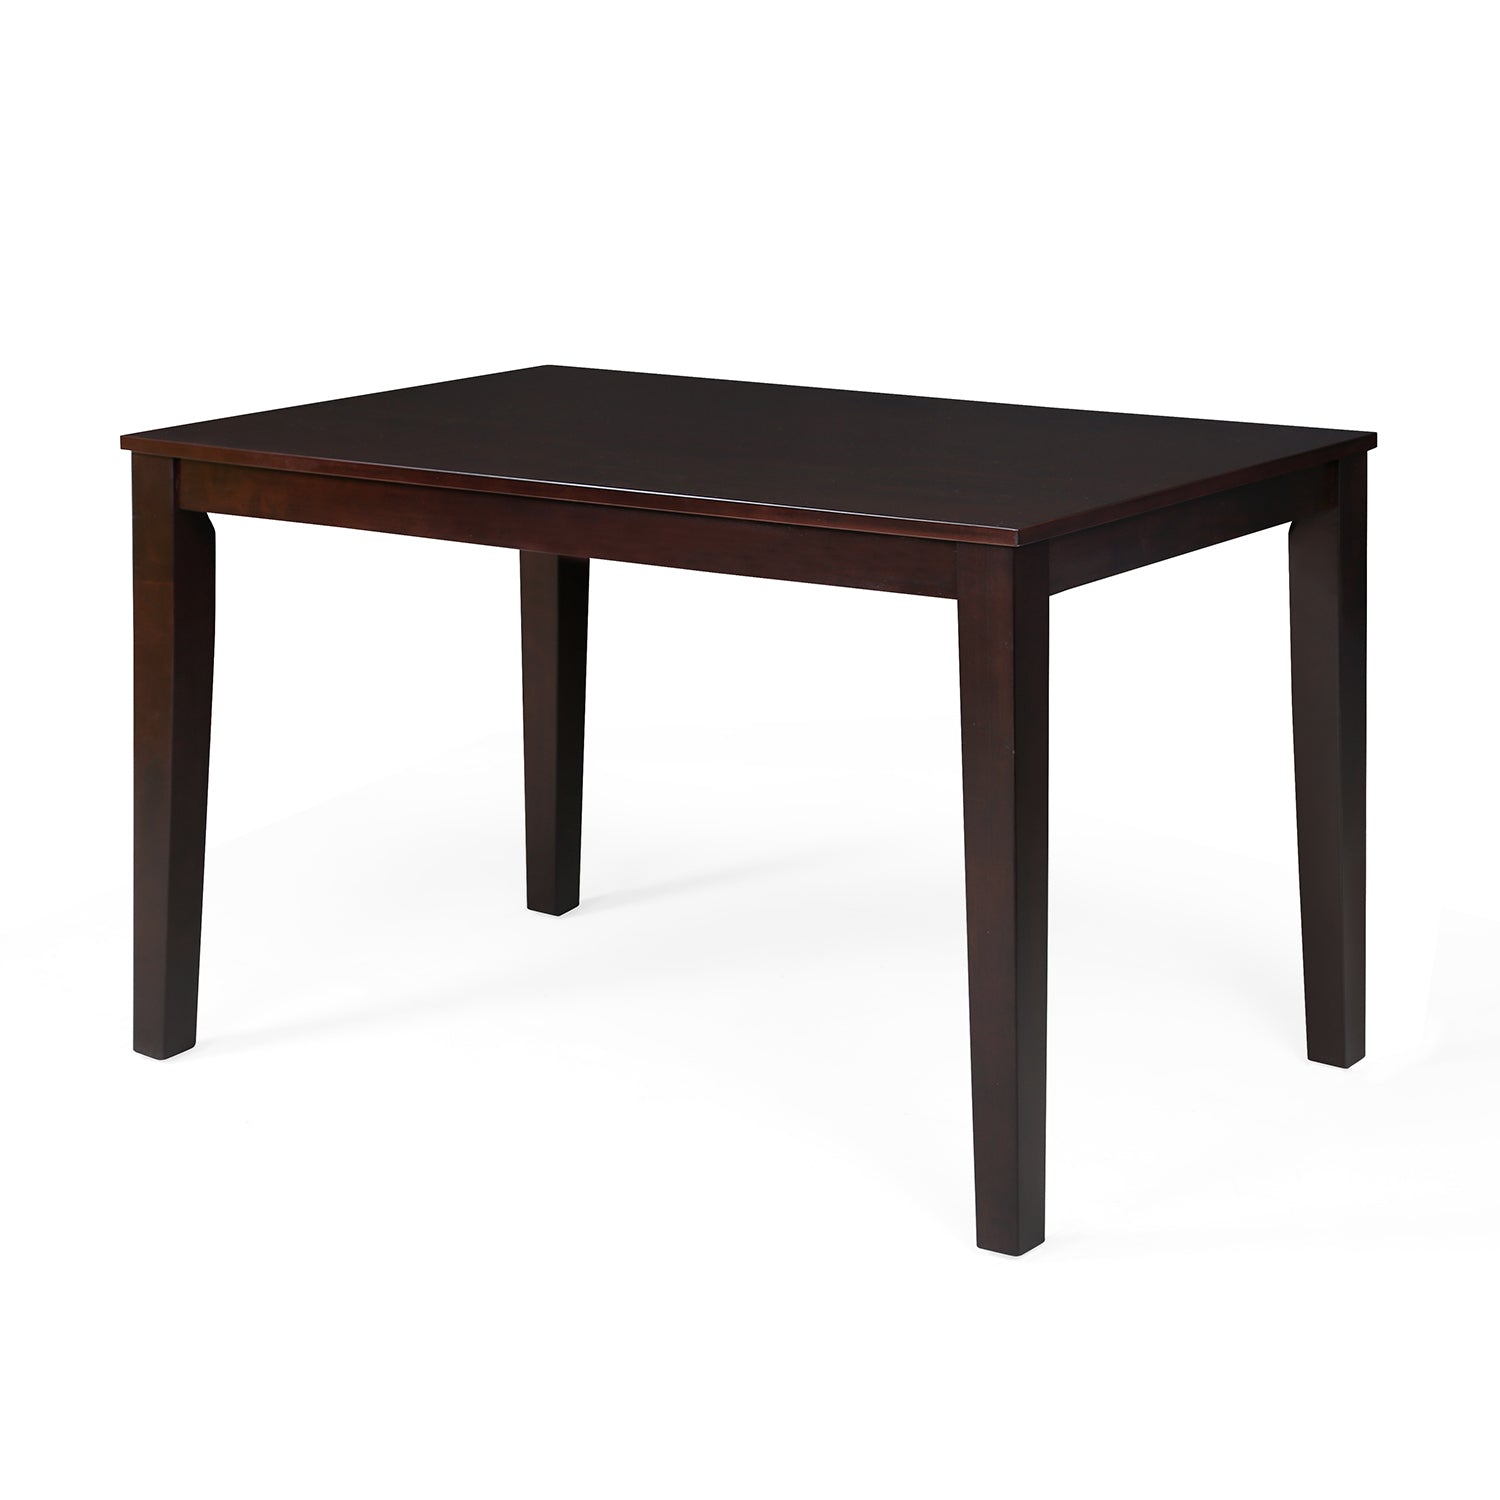 Waves 4 Seater Dining Table (Brown)